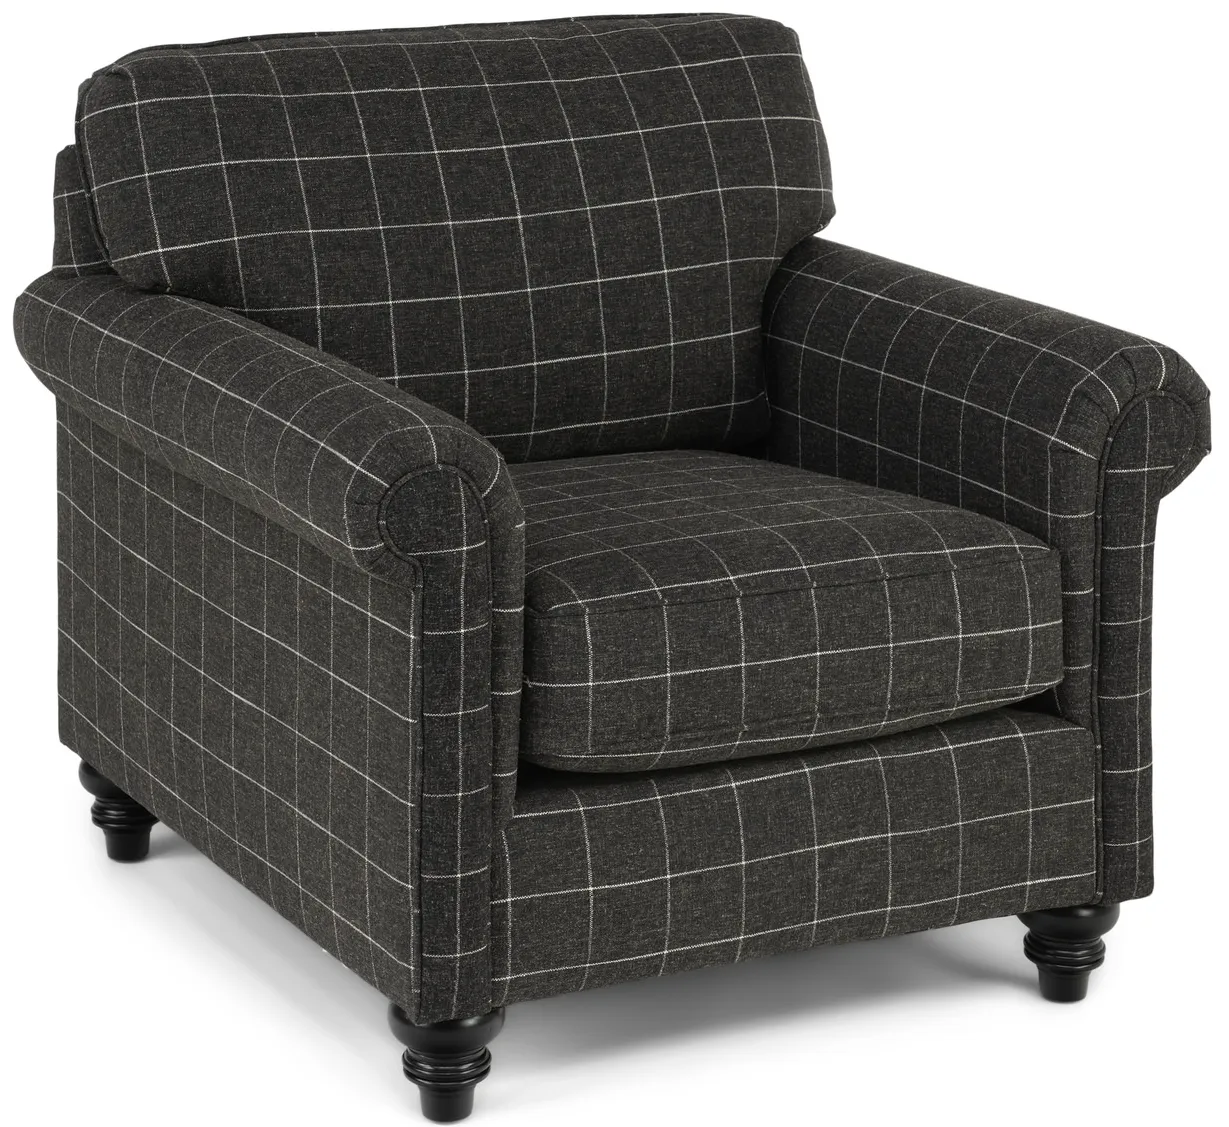 M9 Dolly Accent Chair